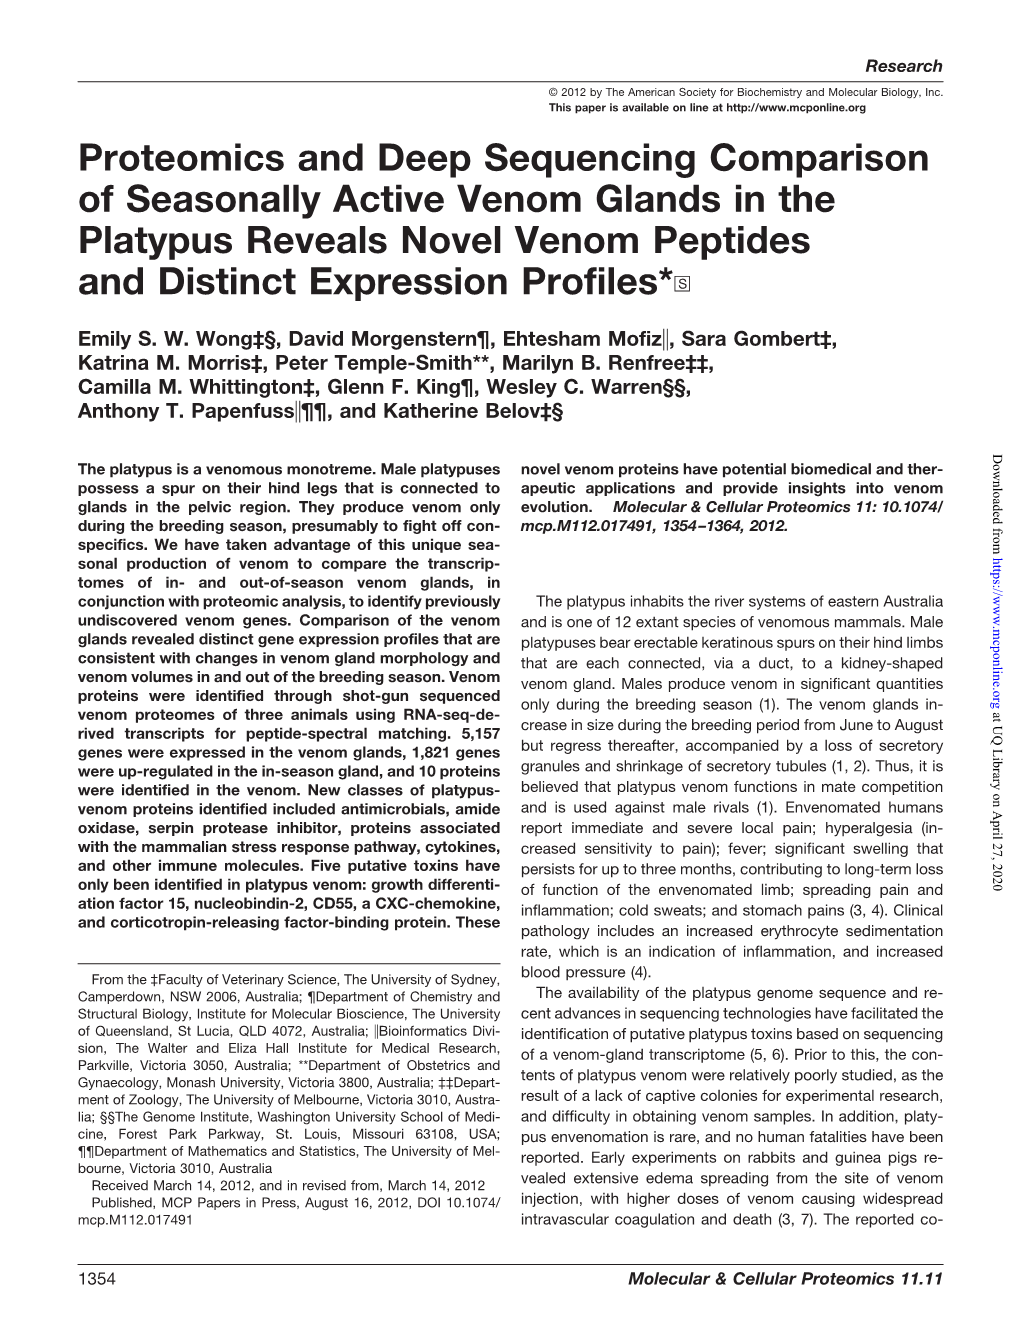 Proteomics and Deep Sequencing Comparison of Seasonally Active Venom Glands in the Platypus Reveals Novel Venom Peptides and Distinct Expression Profiles*□S